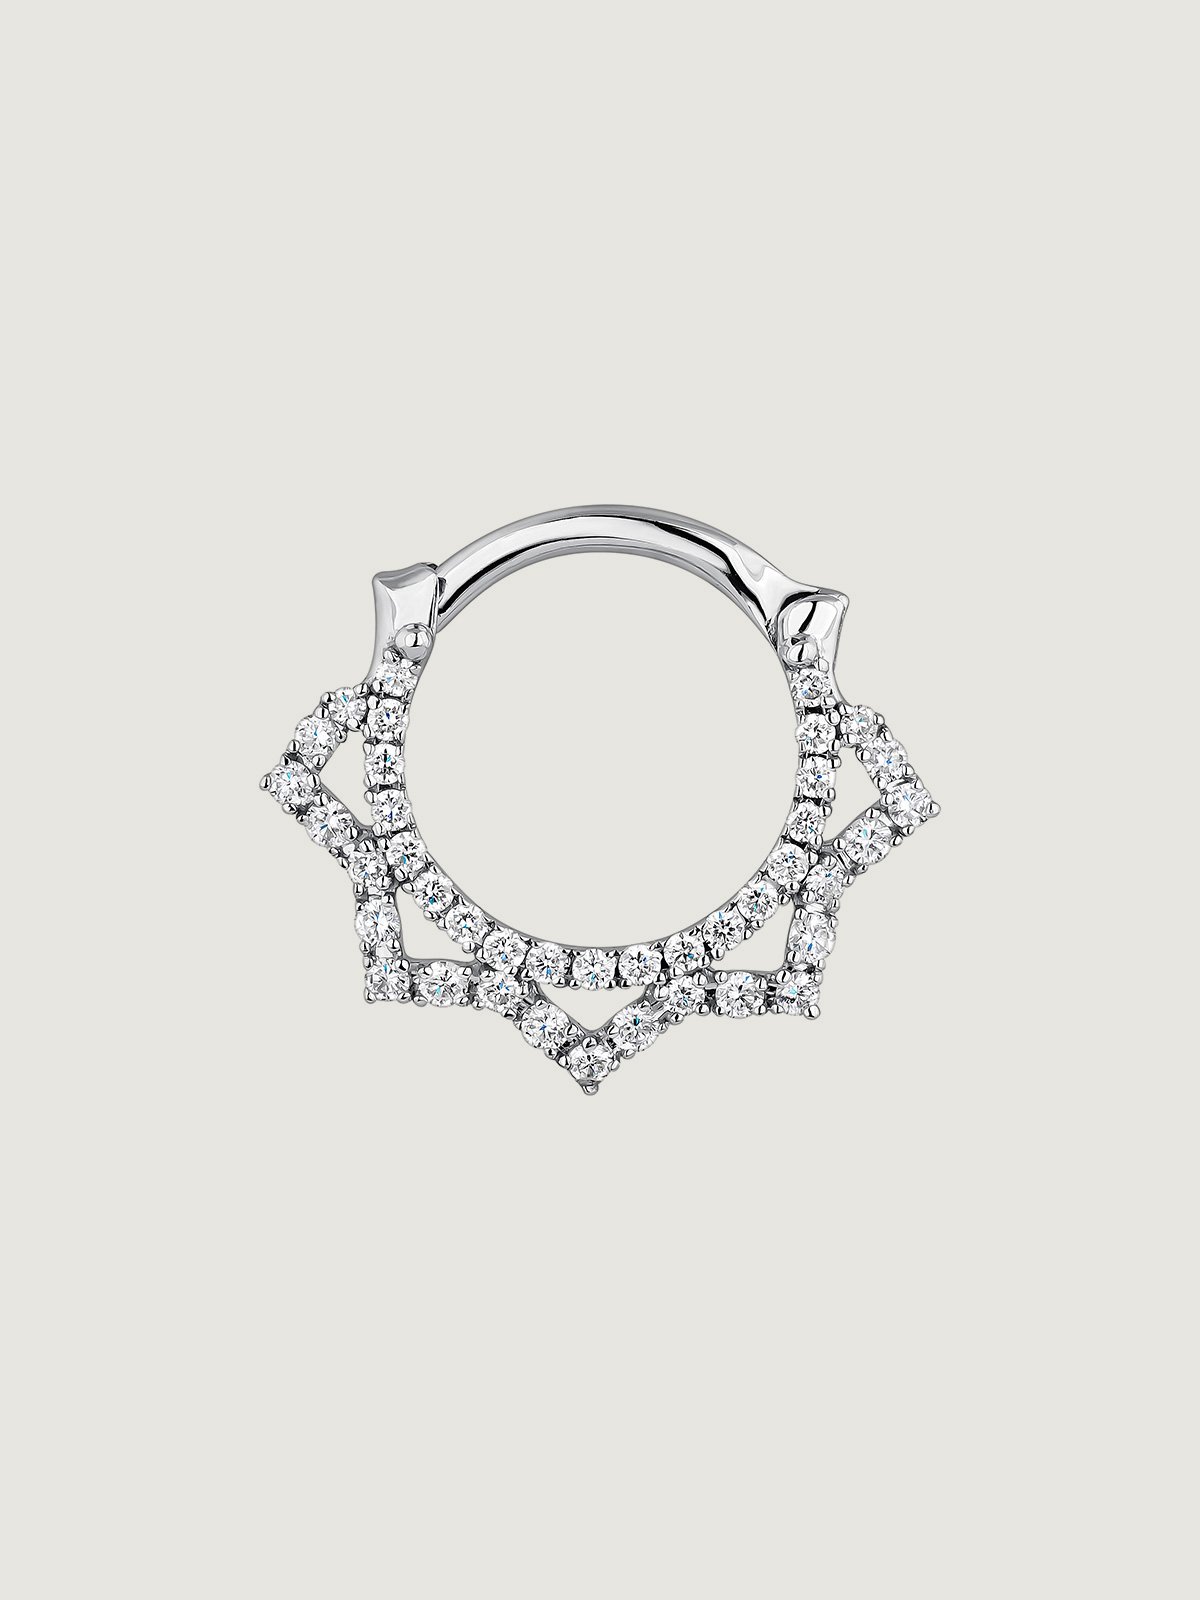 18K white gold daith ring piercing with diamonds and spikes